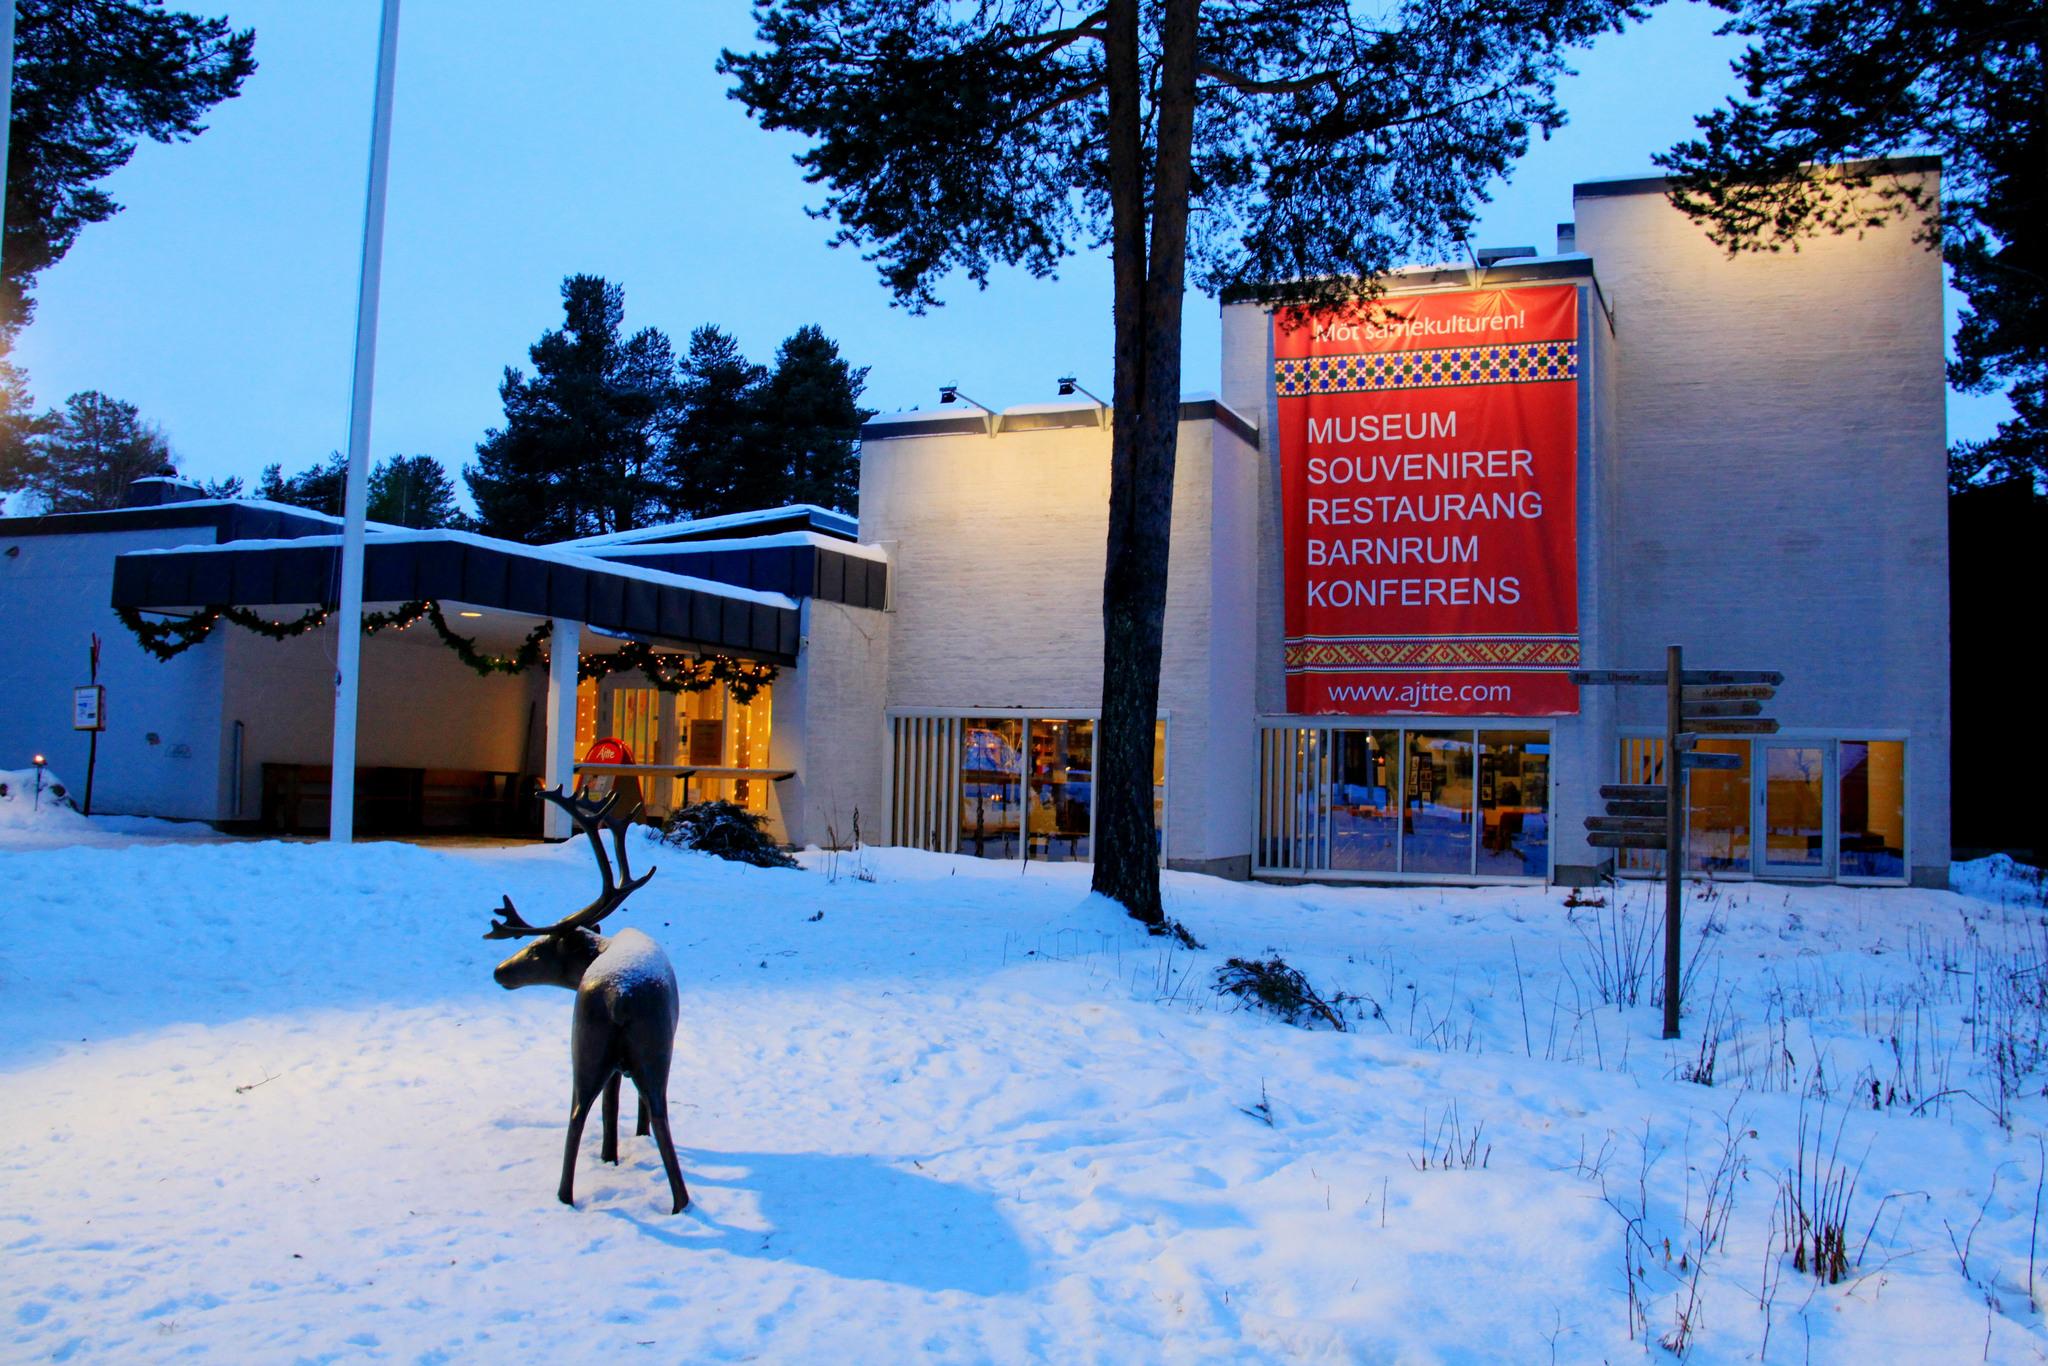 A museum building in the snow. In front is a reindeer sculpture.